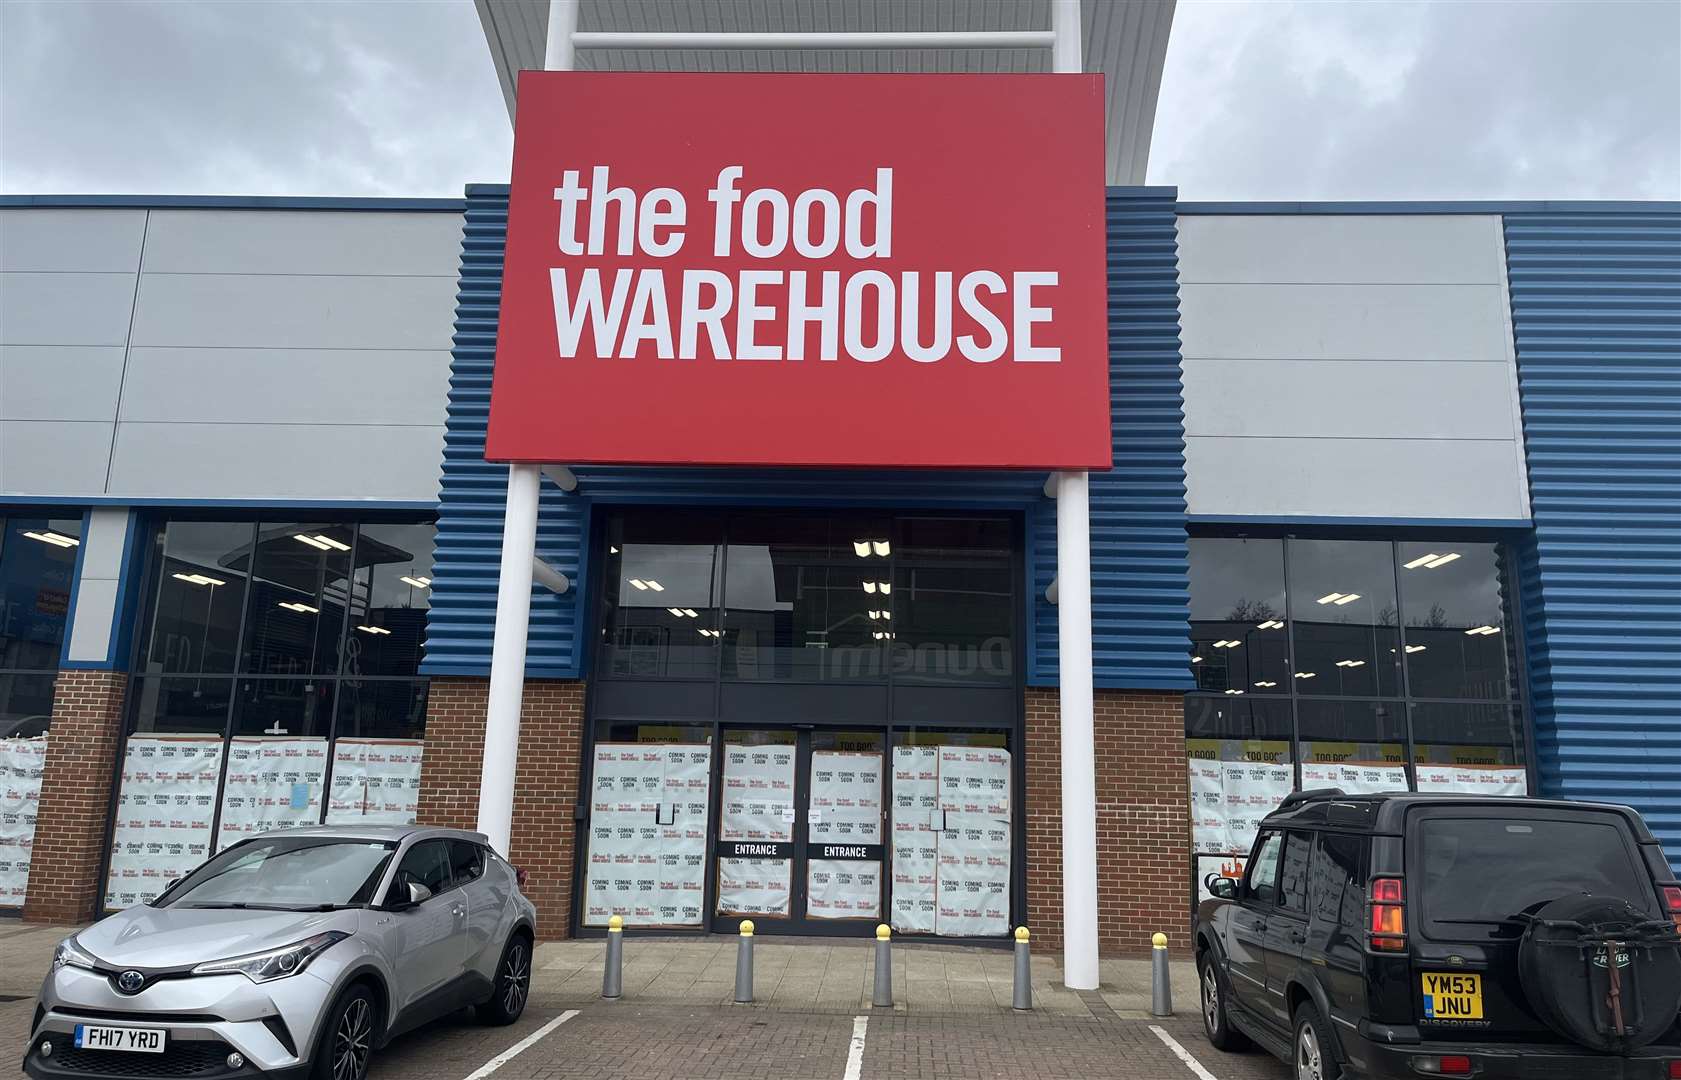 The Food Warehouse already has more than 150 stores across the country; it will open on Ashford Retail Park next week